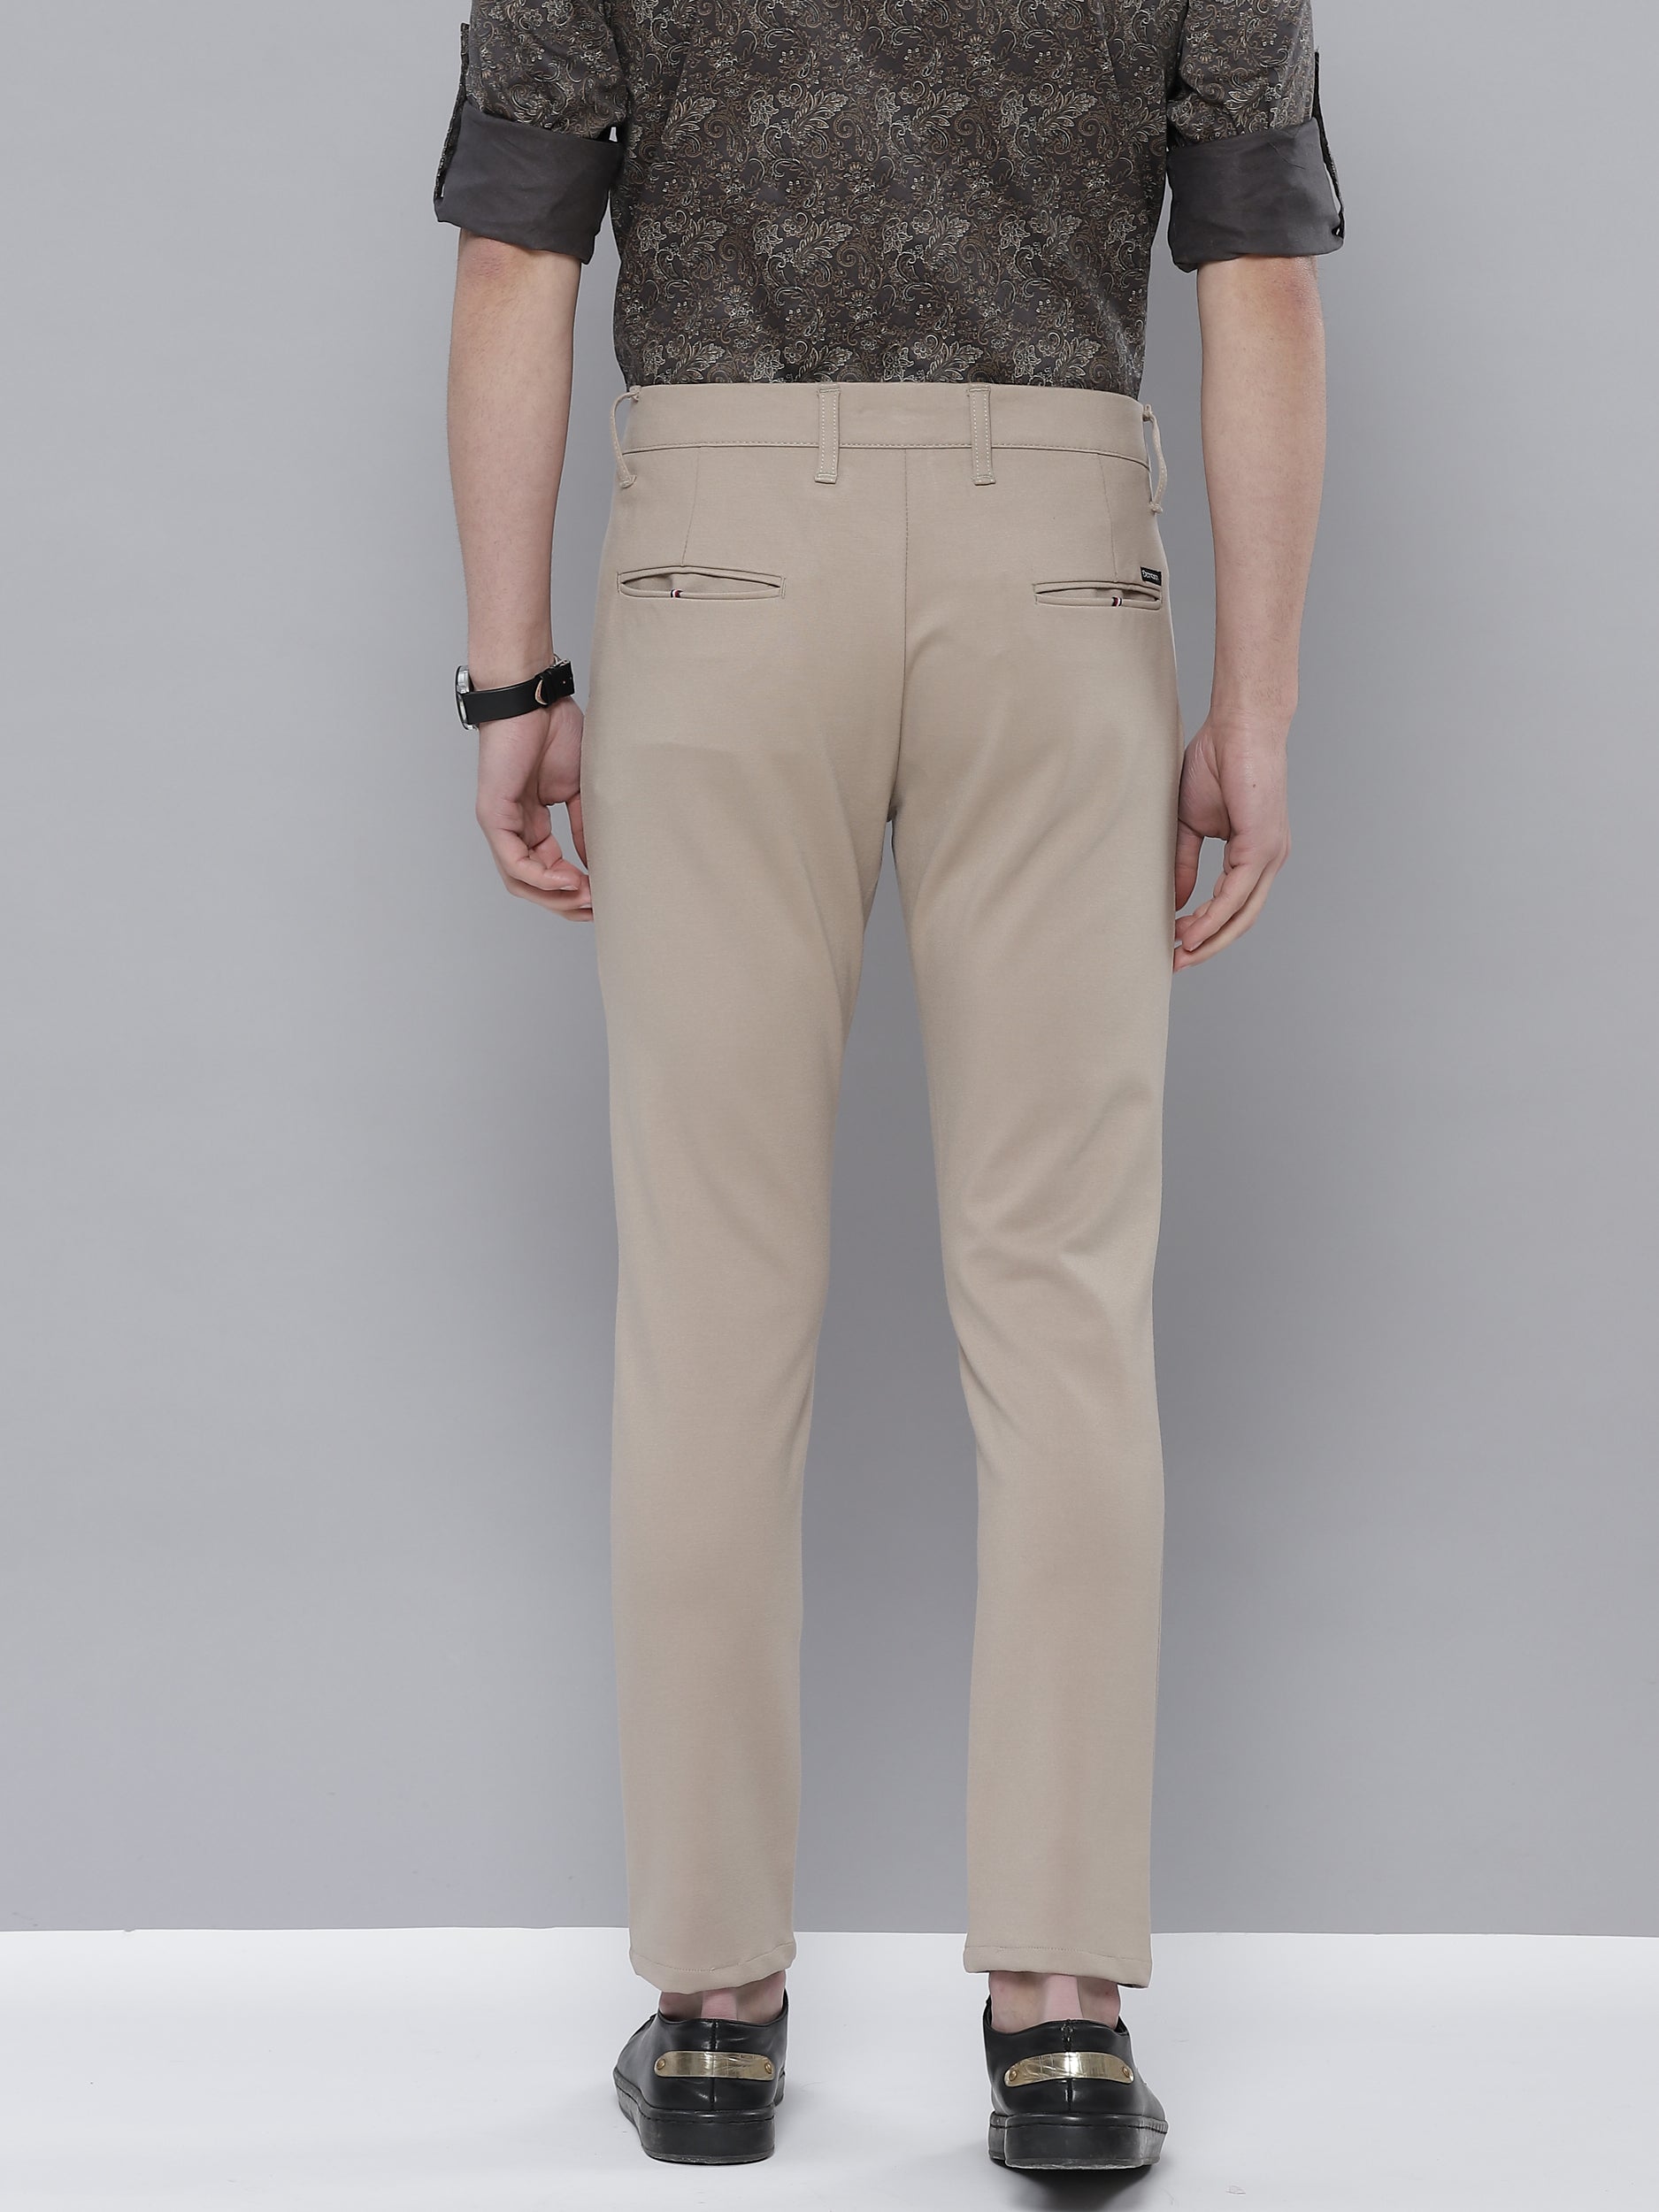 Men's Wrinkle-Free Stretch Twill Pants - and TravelSmith Travel Solutions  and Gear